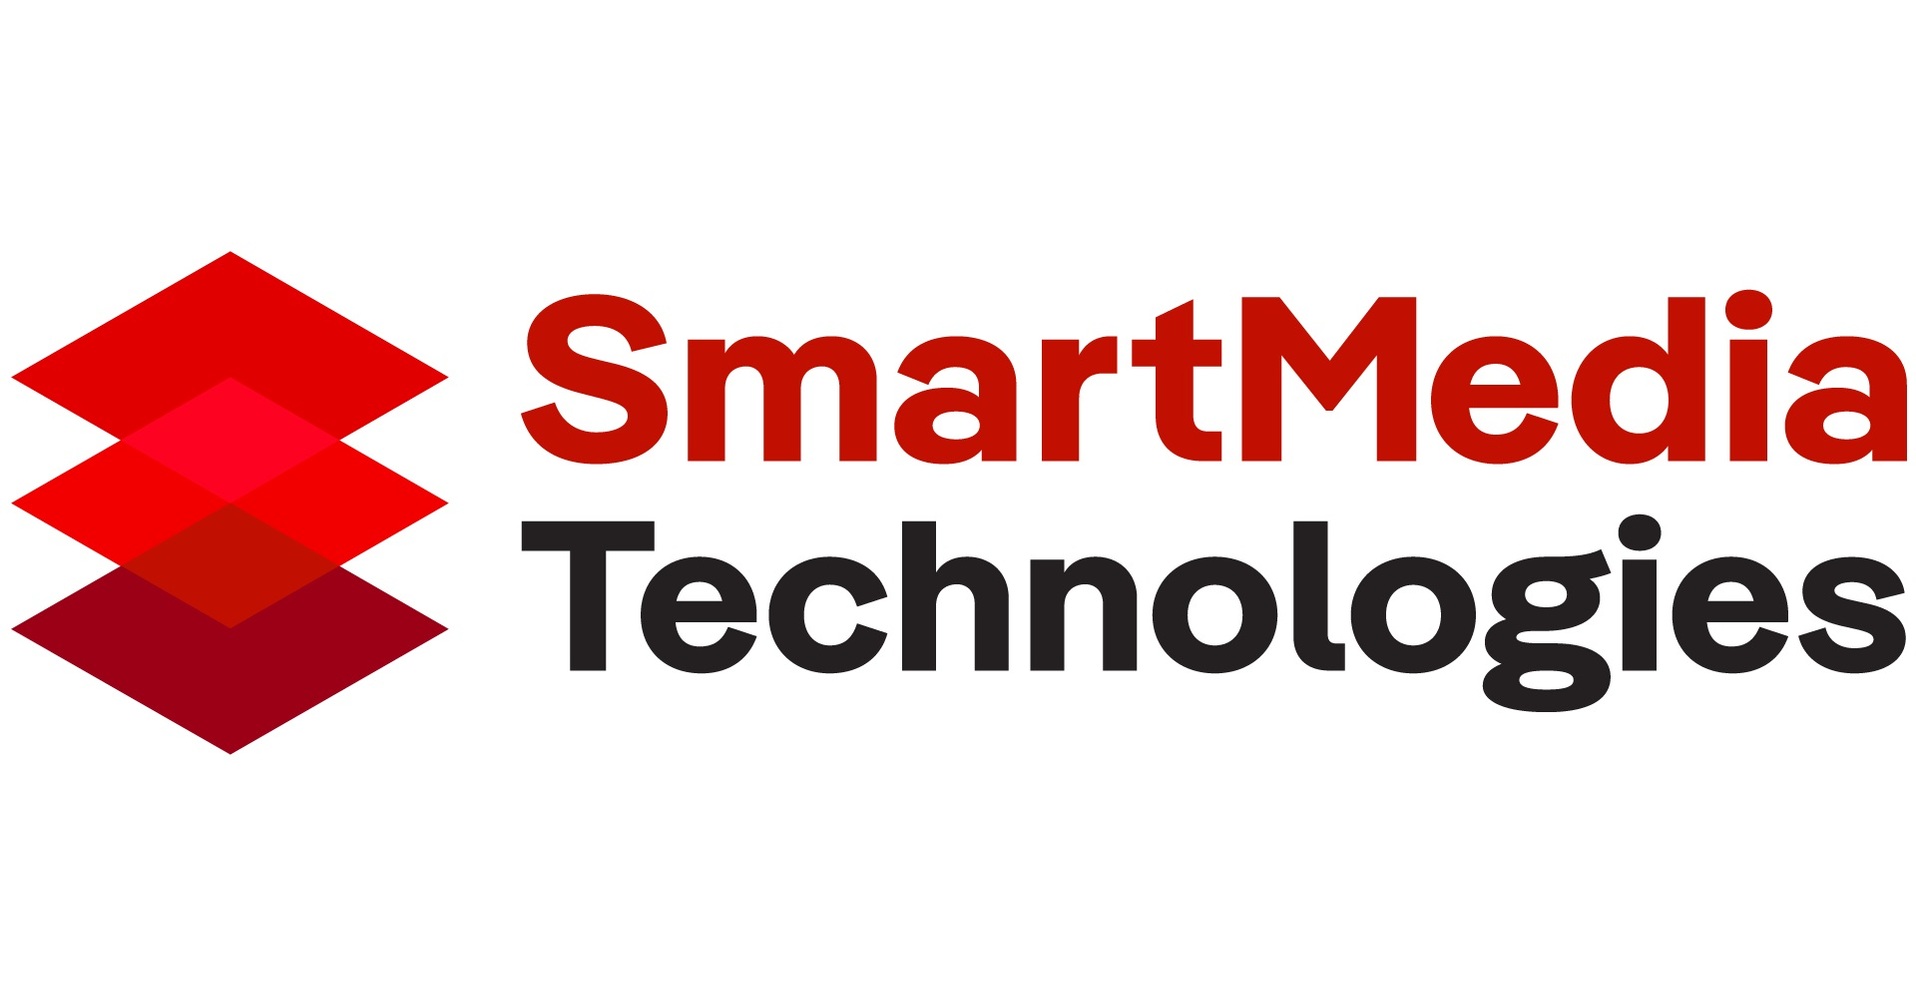 SmartMedia Technologies Acquires BLOCKv Solutions, Geronimo and Austella as Part of a Rapid Global & Web3 Platform Expansion Strategy